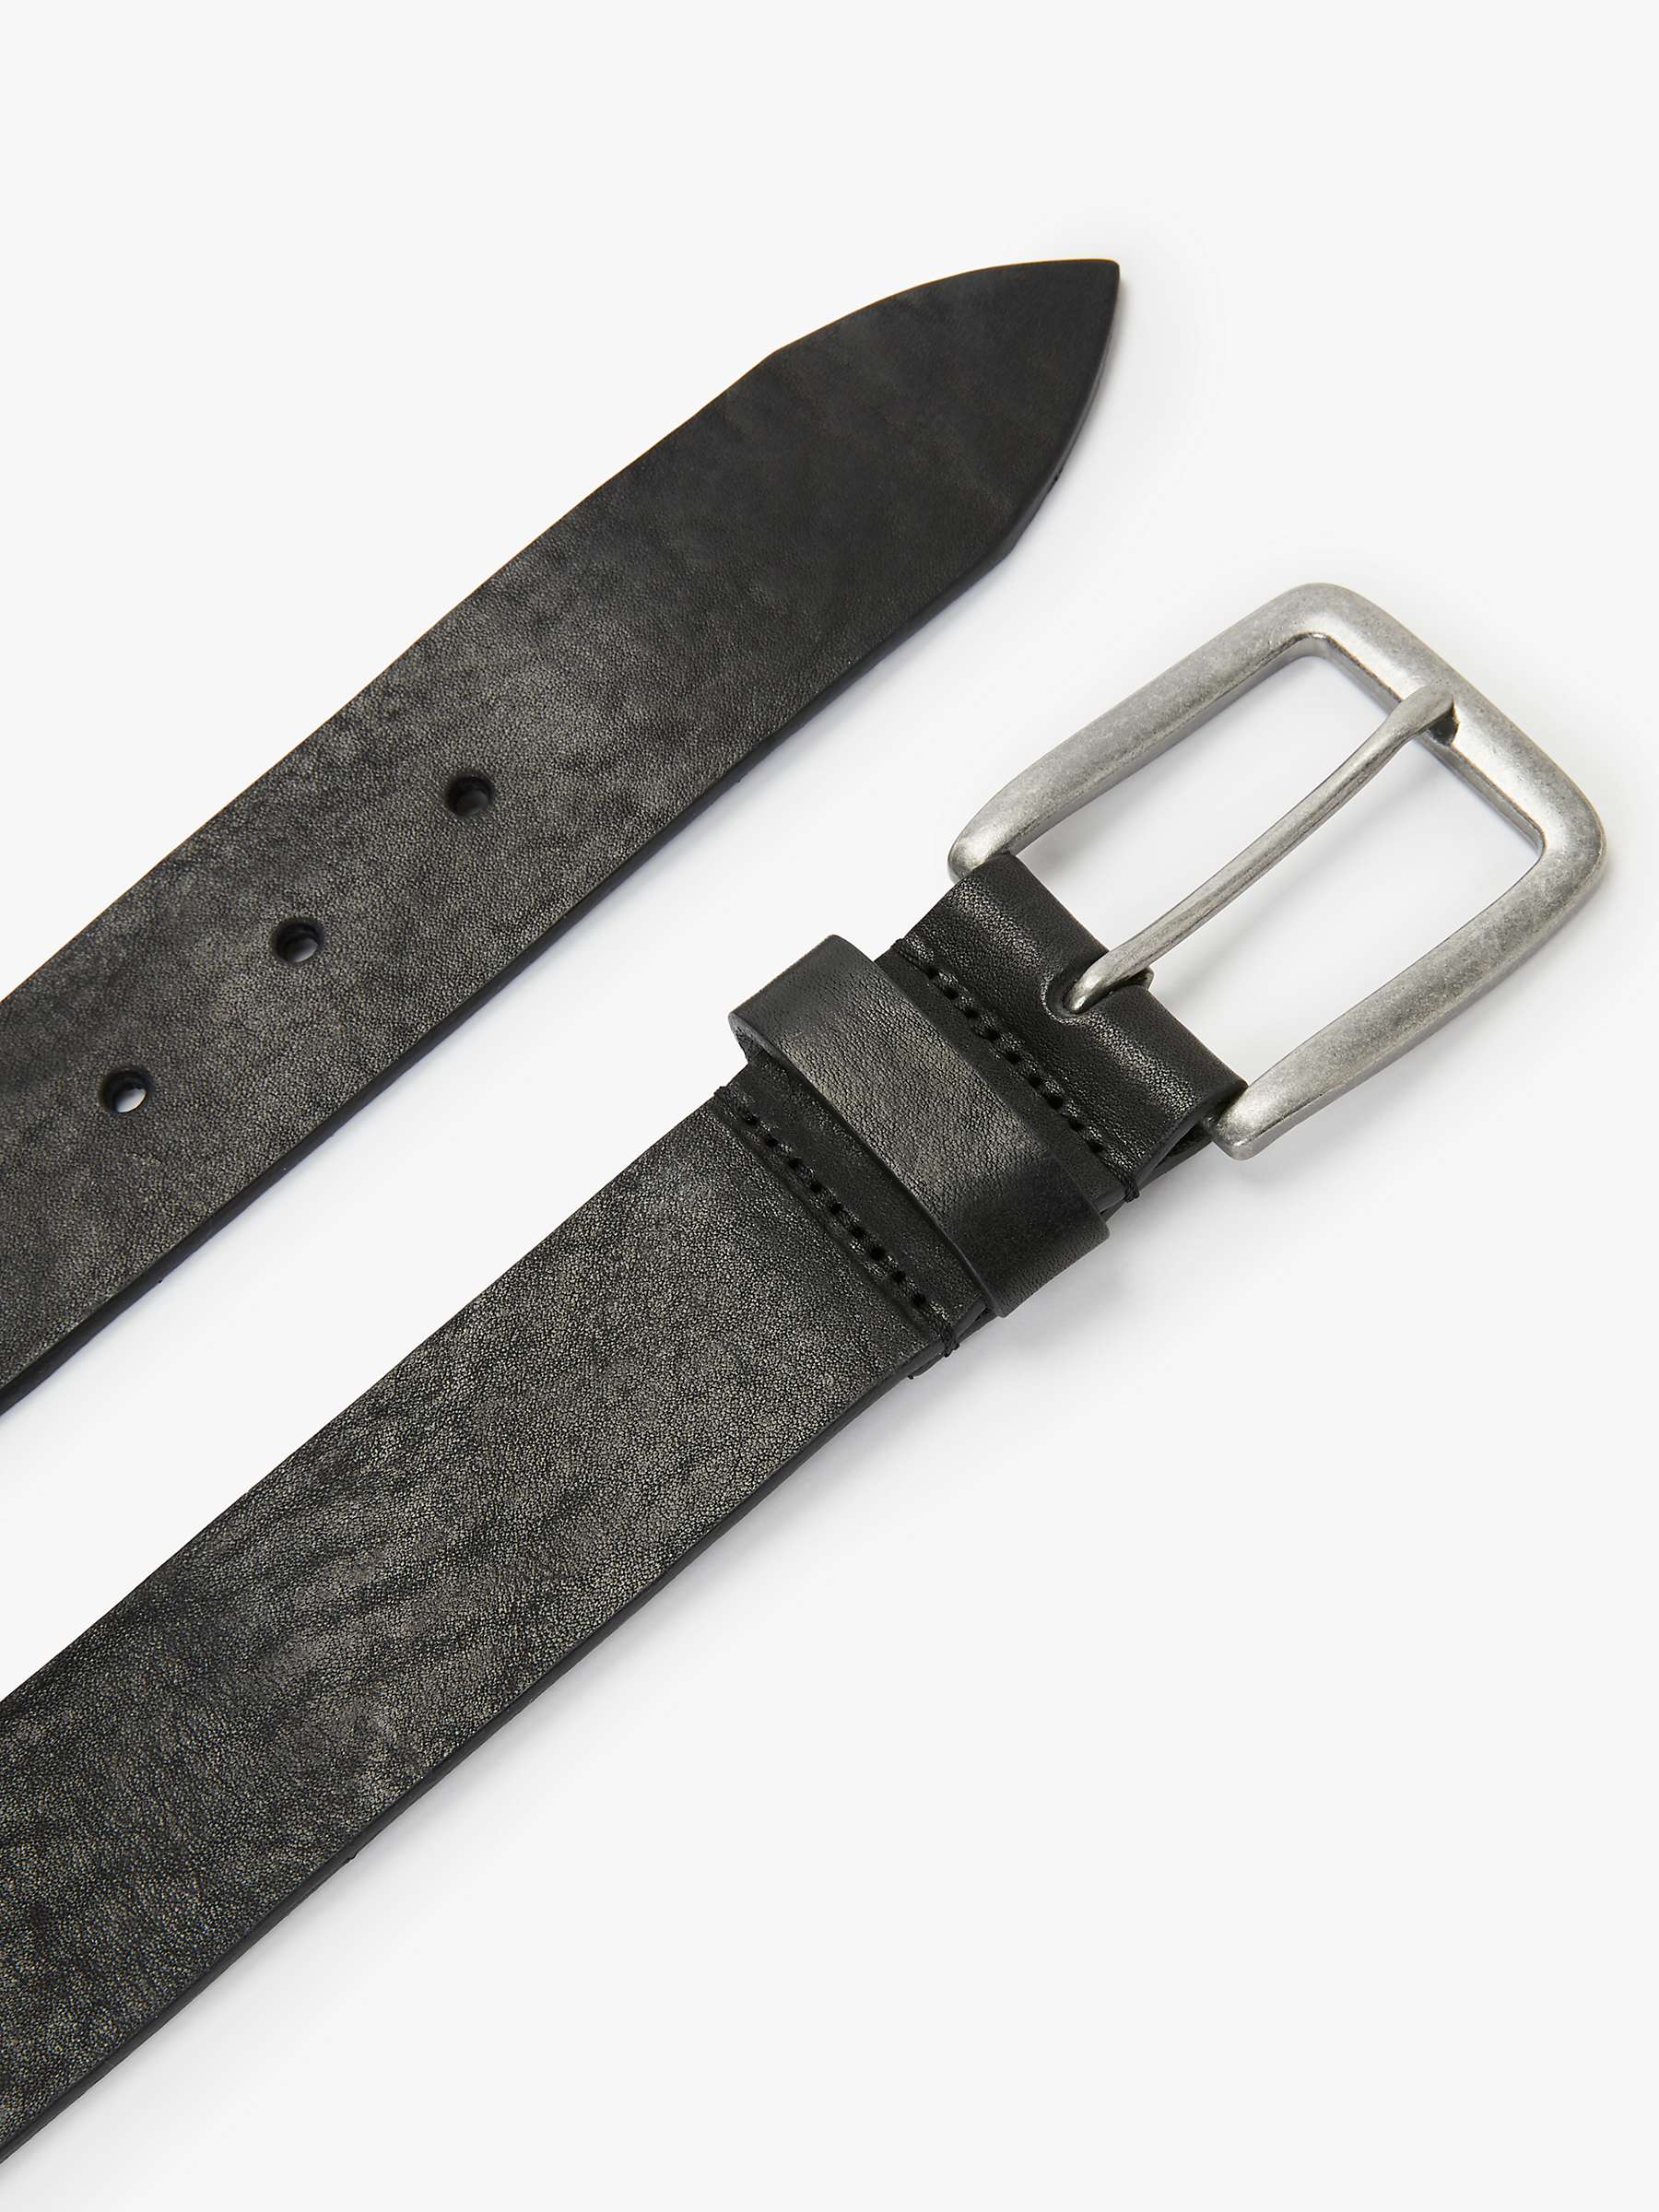 John Lewis Made in Italy Leather Jeans Belt, Black at John Lewis & Partners